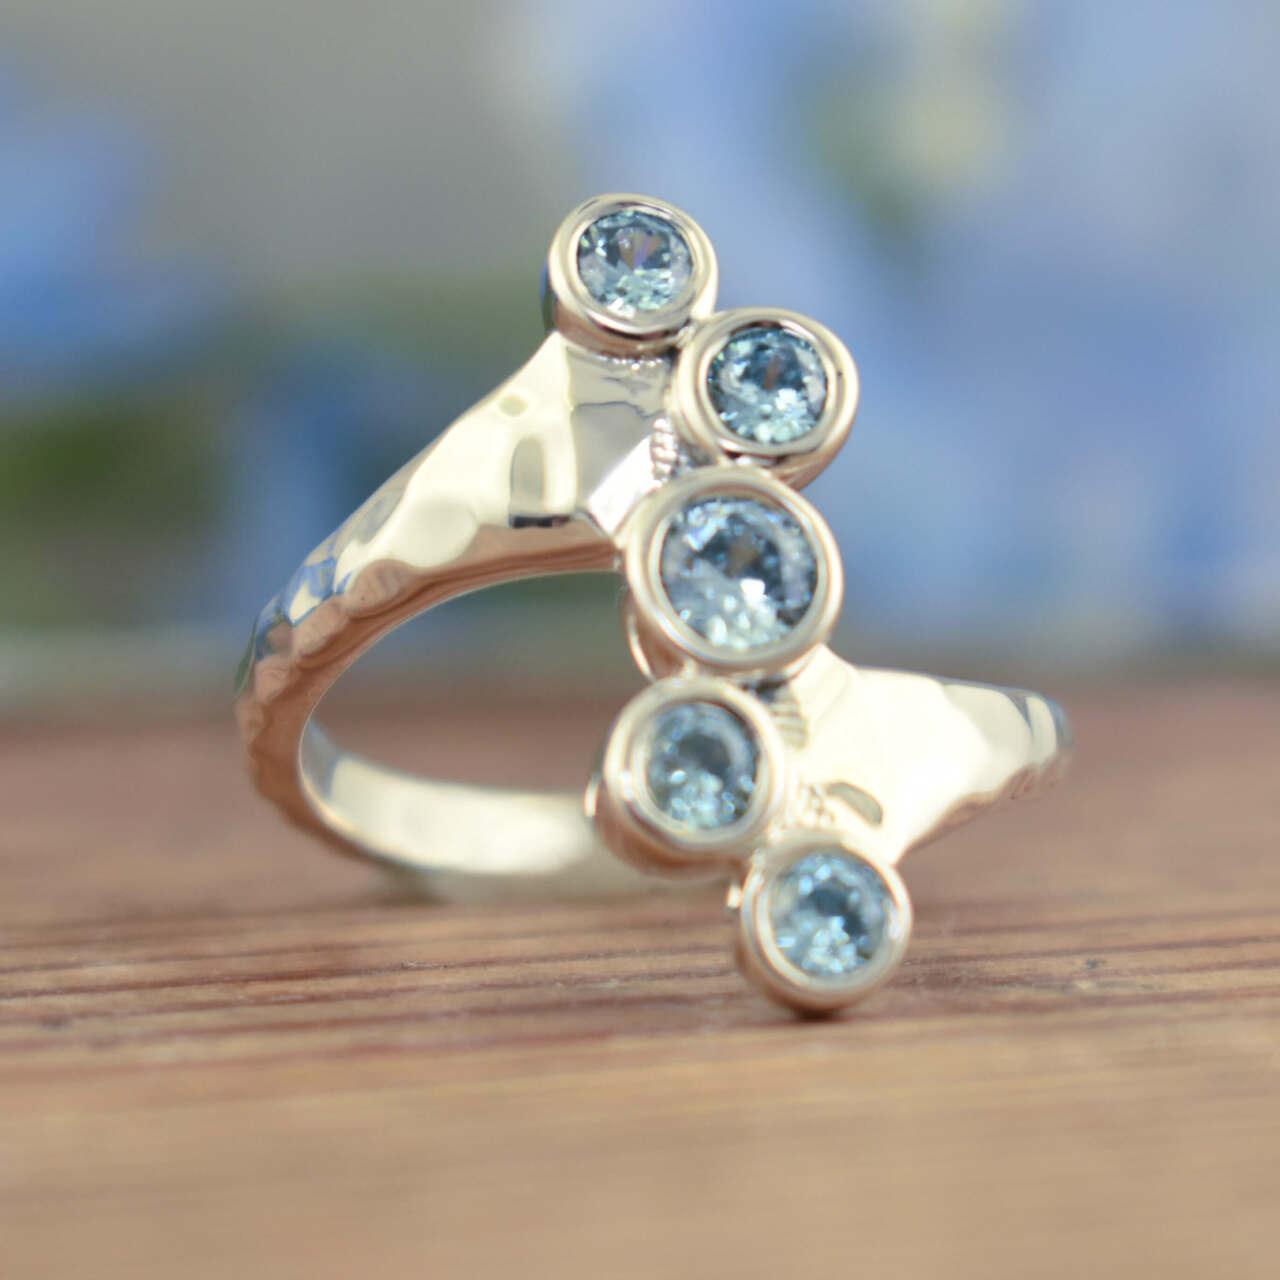 .925 sterling silver ring with five blue stones